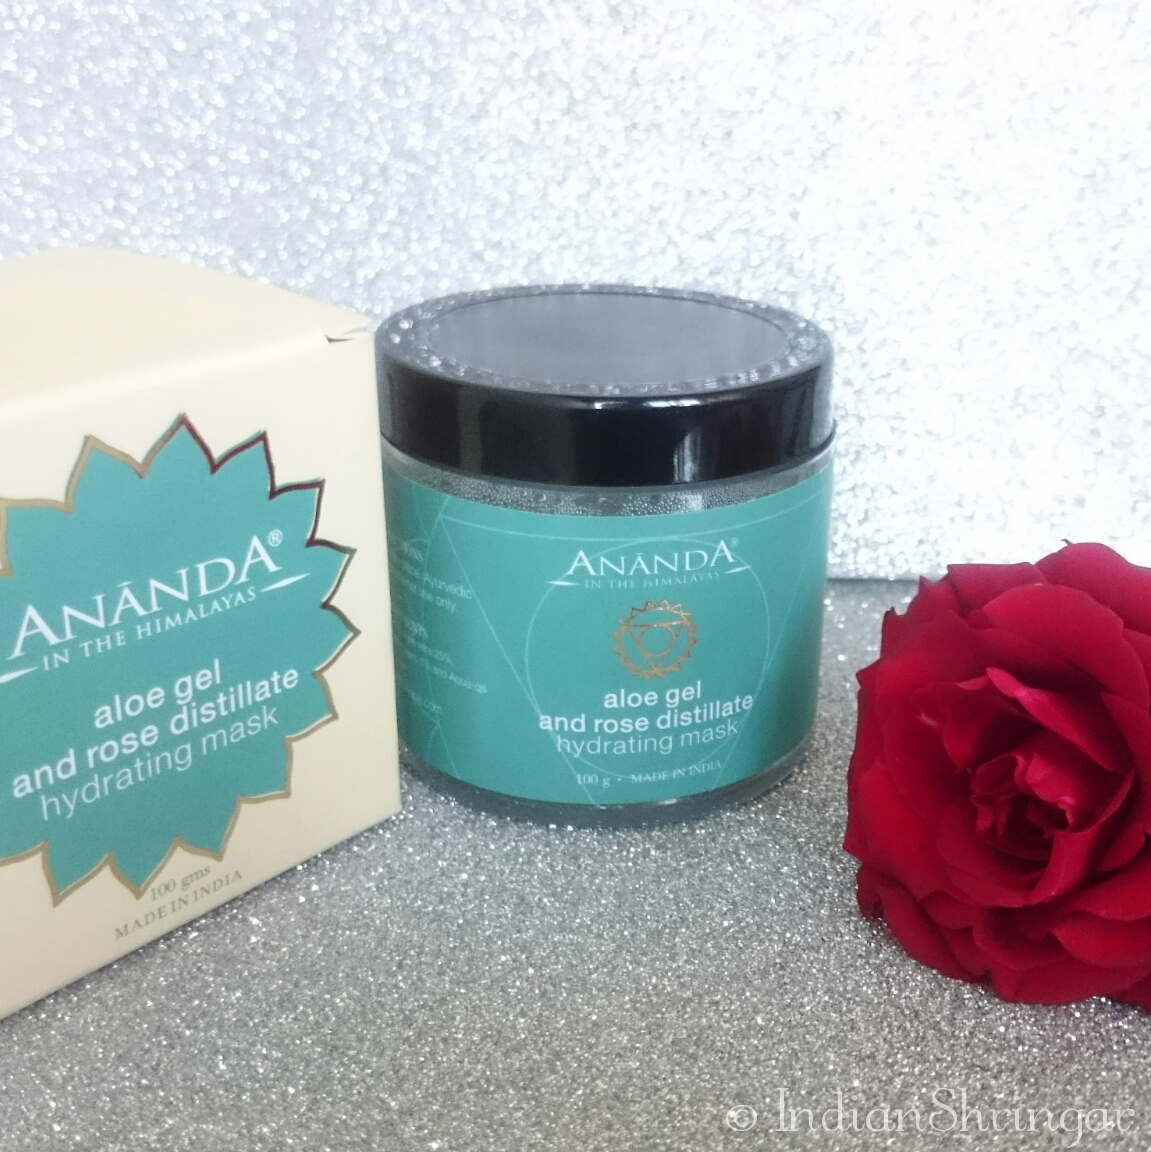 Ananda Spa Aloe Gel and Rose Distillate Hydrating Mask review